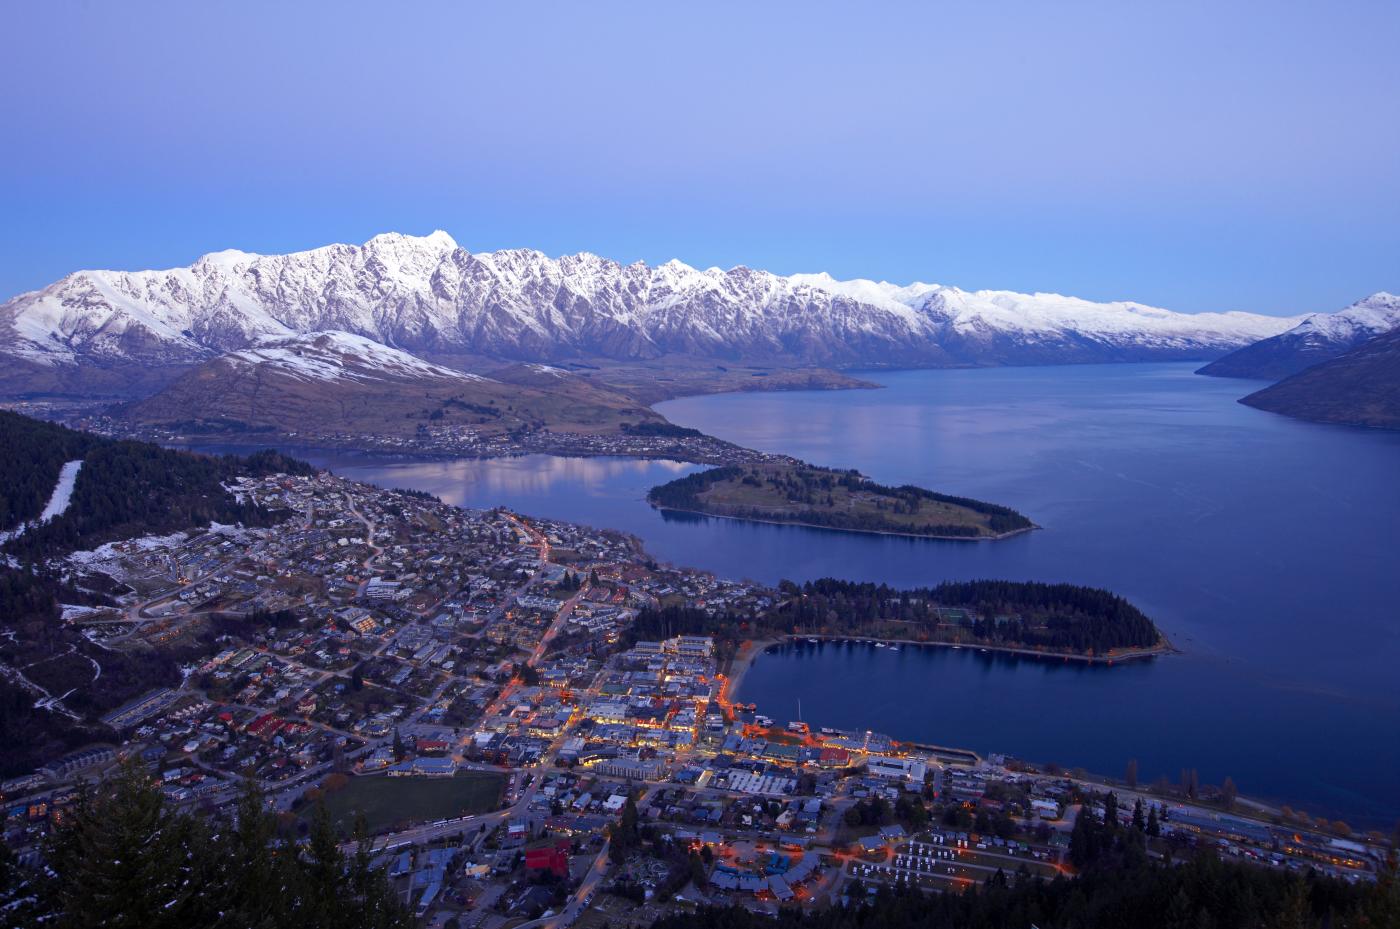 Aerial view of Queenstown looking at the town, lake and The Remarkables